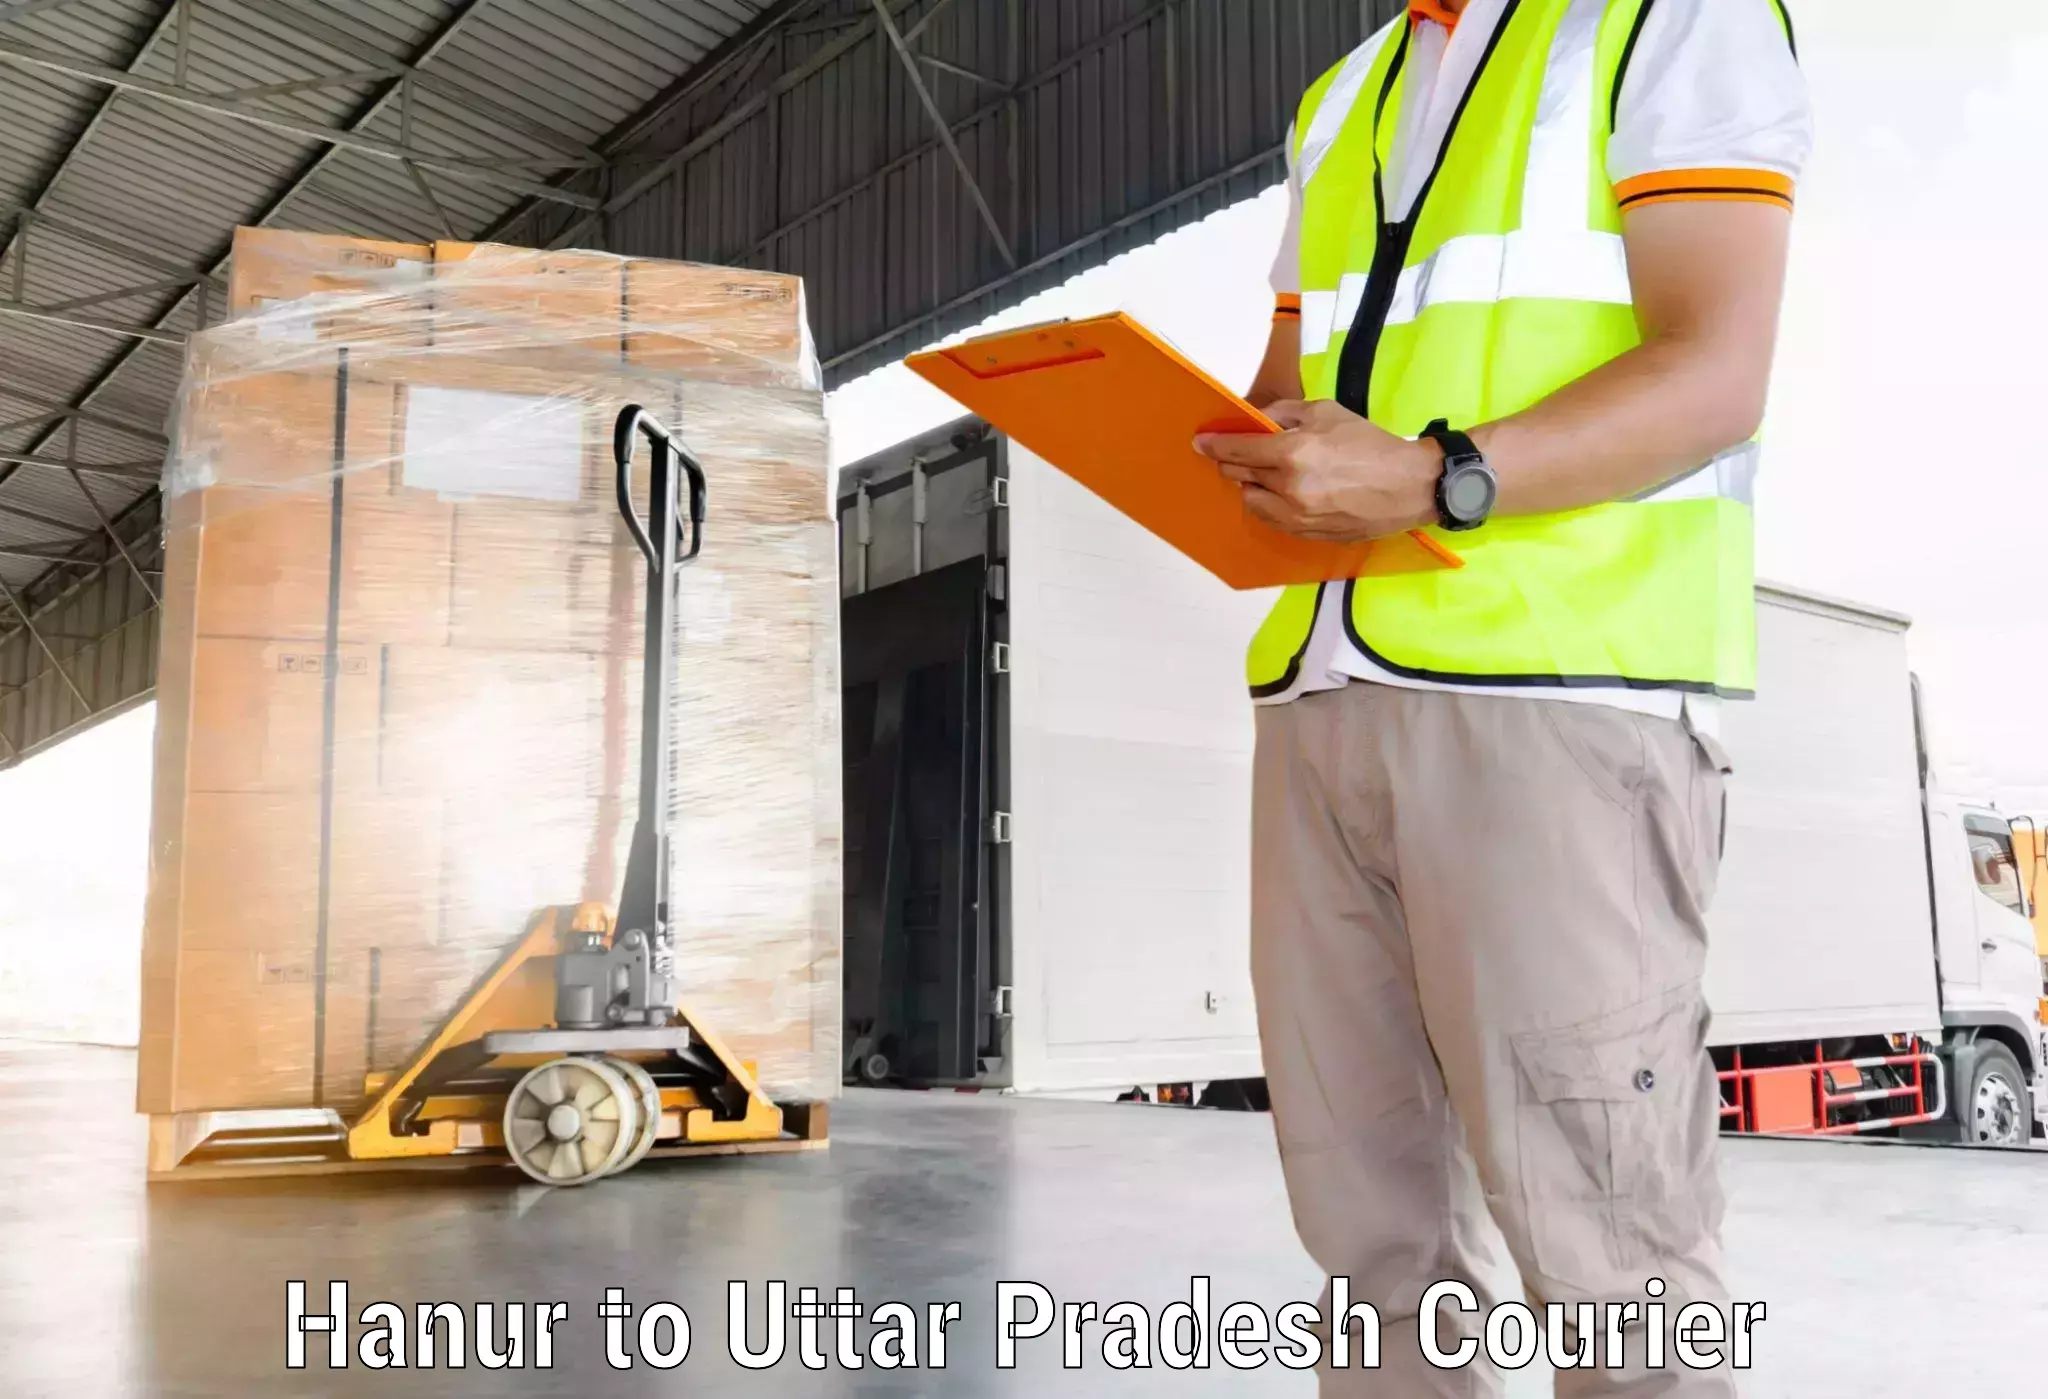 User-friendly delivery service Hanur to Khutar